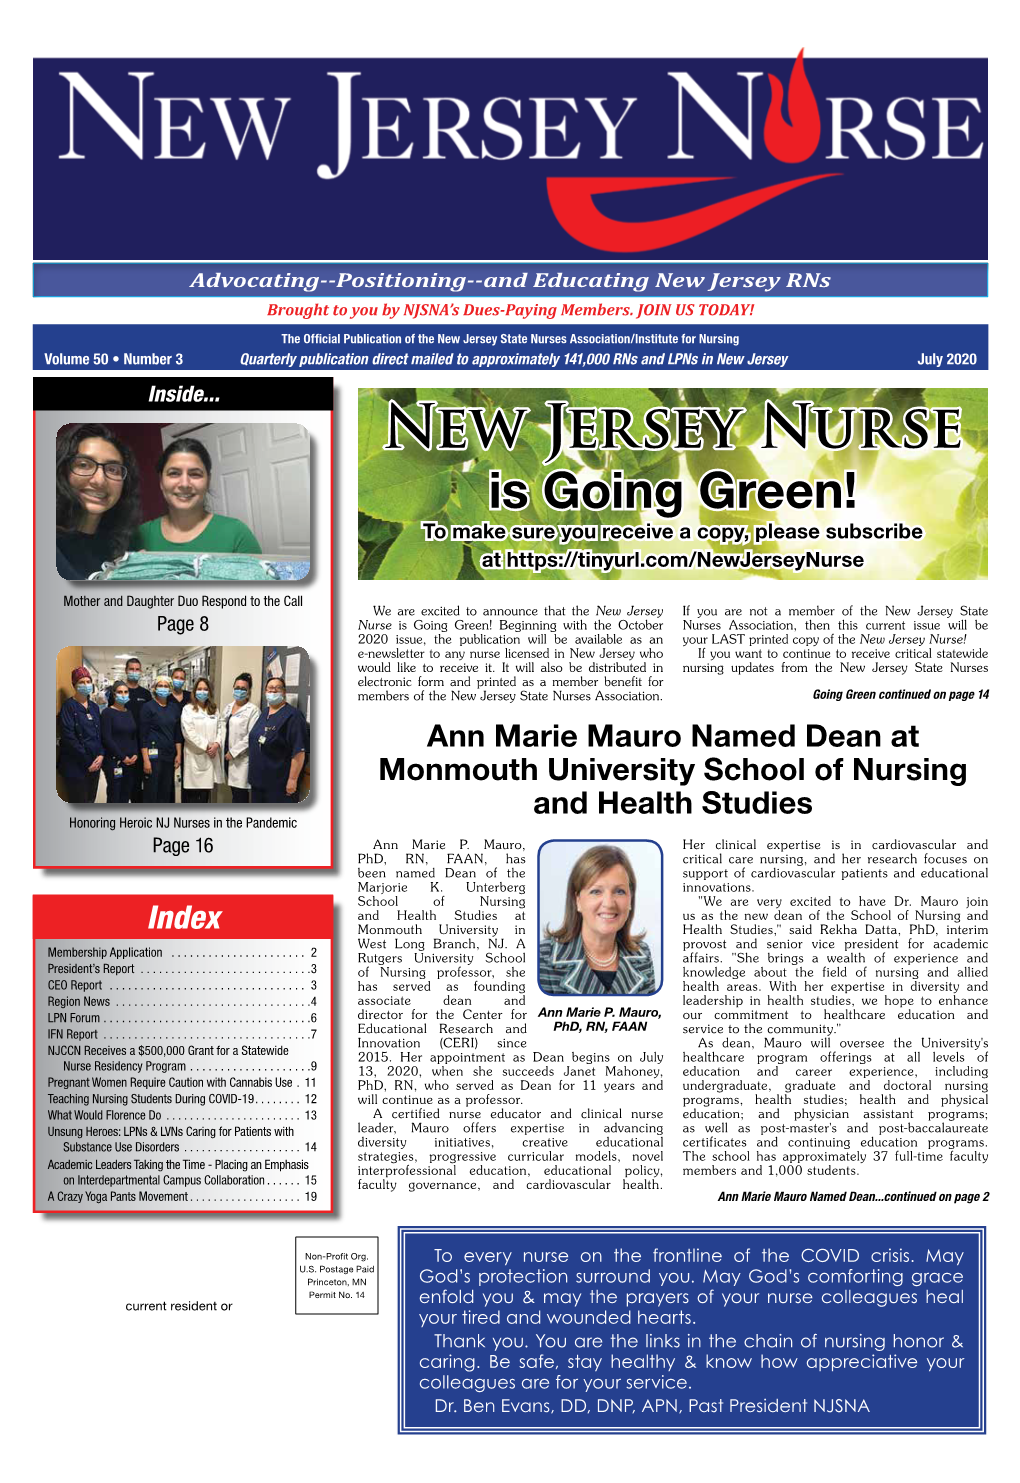 New Jersey Nurse Is Going Green! to Make Sure You Receive a Copy, Please Subscribe At